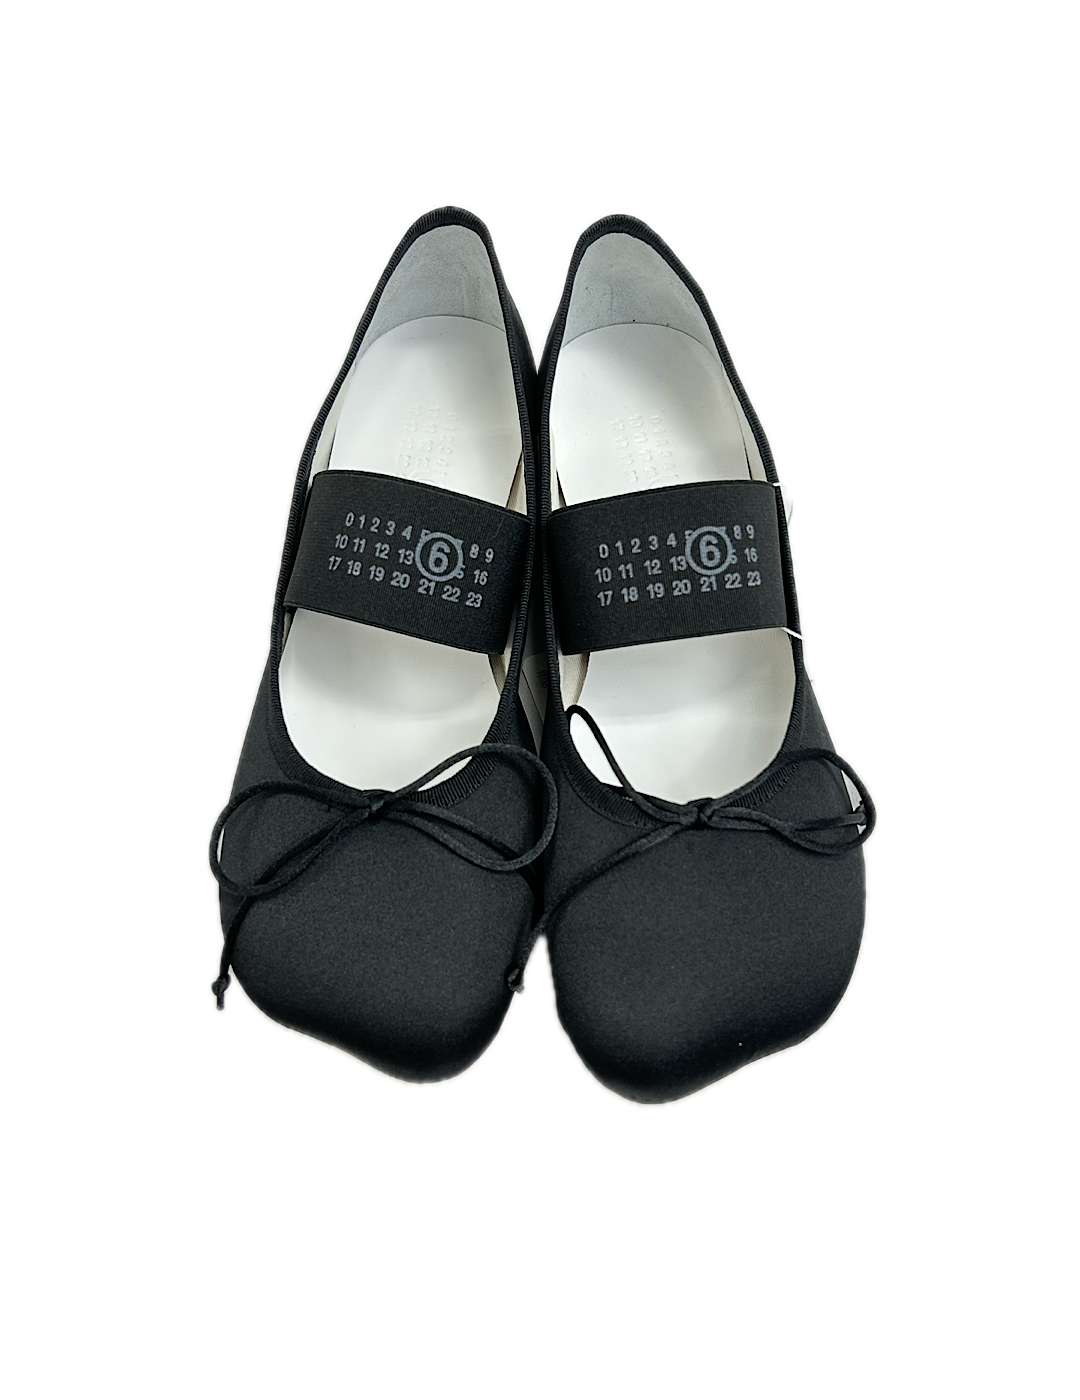 <img class='new_mark_img1' src='https://img.shop-pro.jp/img/new/icons6.gif' style='border:none;display:inline;margin:0px;padding:0px;width:auto;' />MM6 MAISON MARGIELA /SHOES